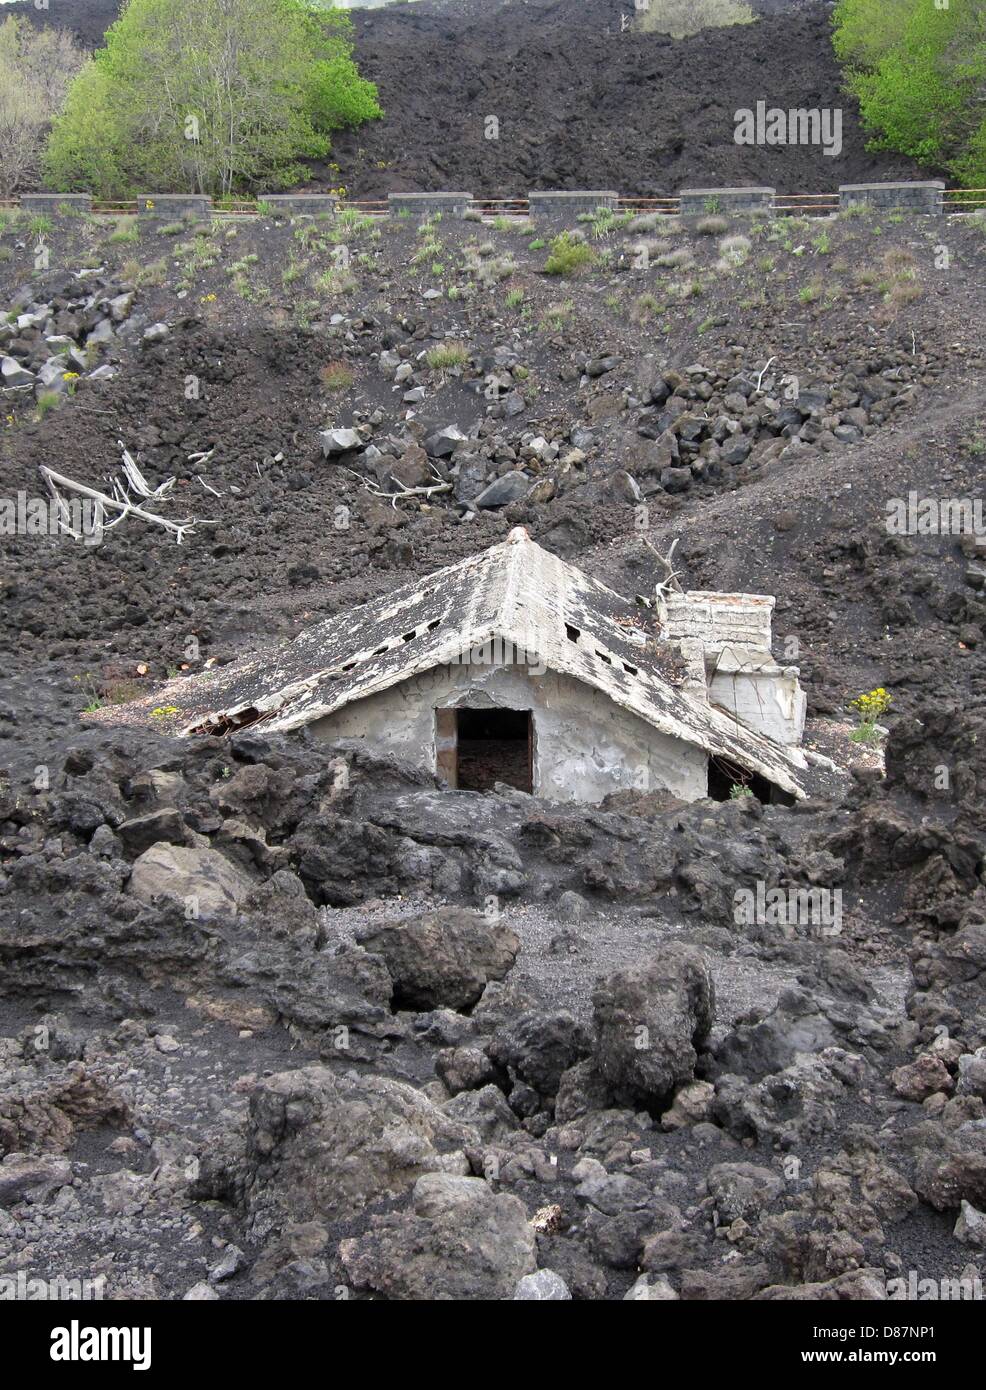 A house is covered with lava from Mount Etna near Zafferana Etnea, Sicily, Italy, 07 May 2013. With a height of 3,323 meters, Mount Etna is Europe's tallest and most active volcano. Photo: JENS KALAENE Stock Photo